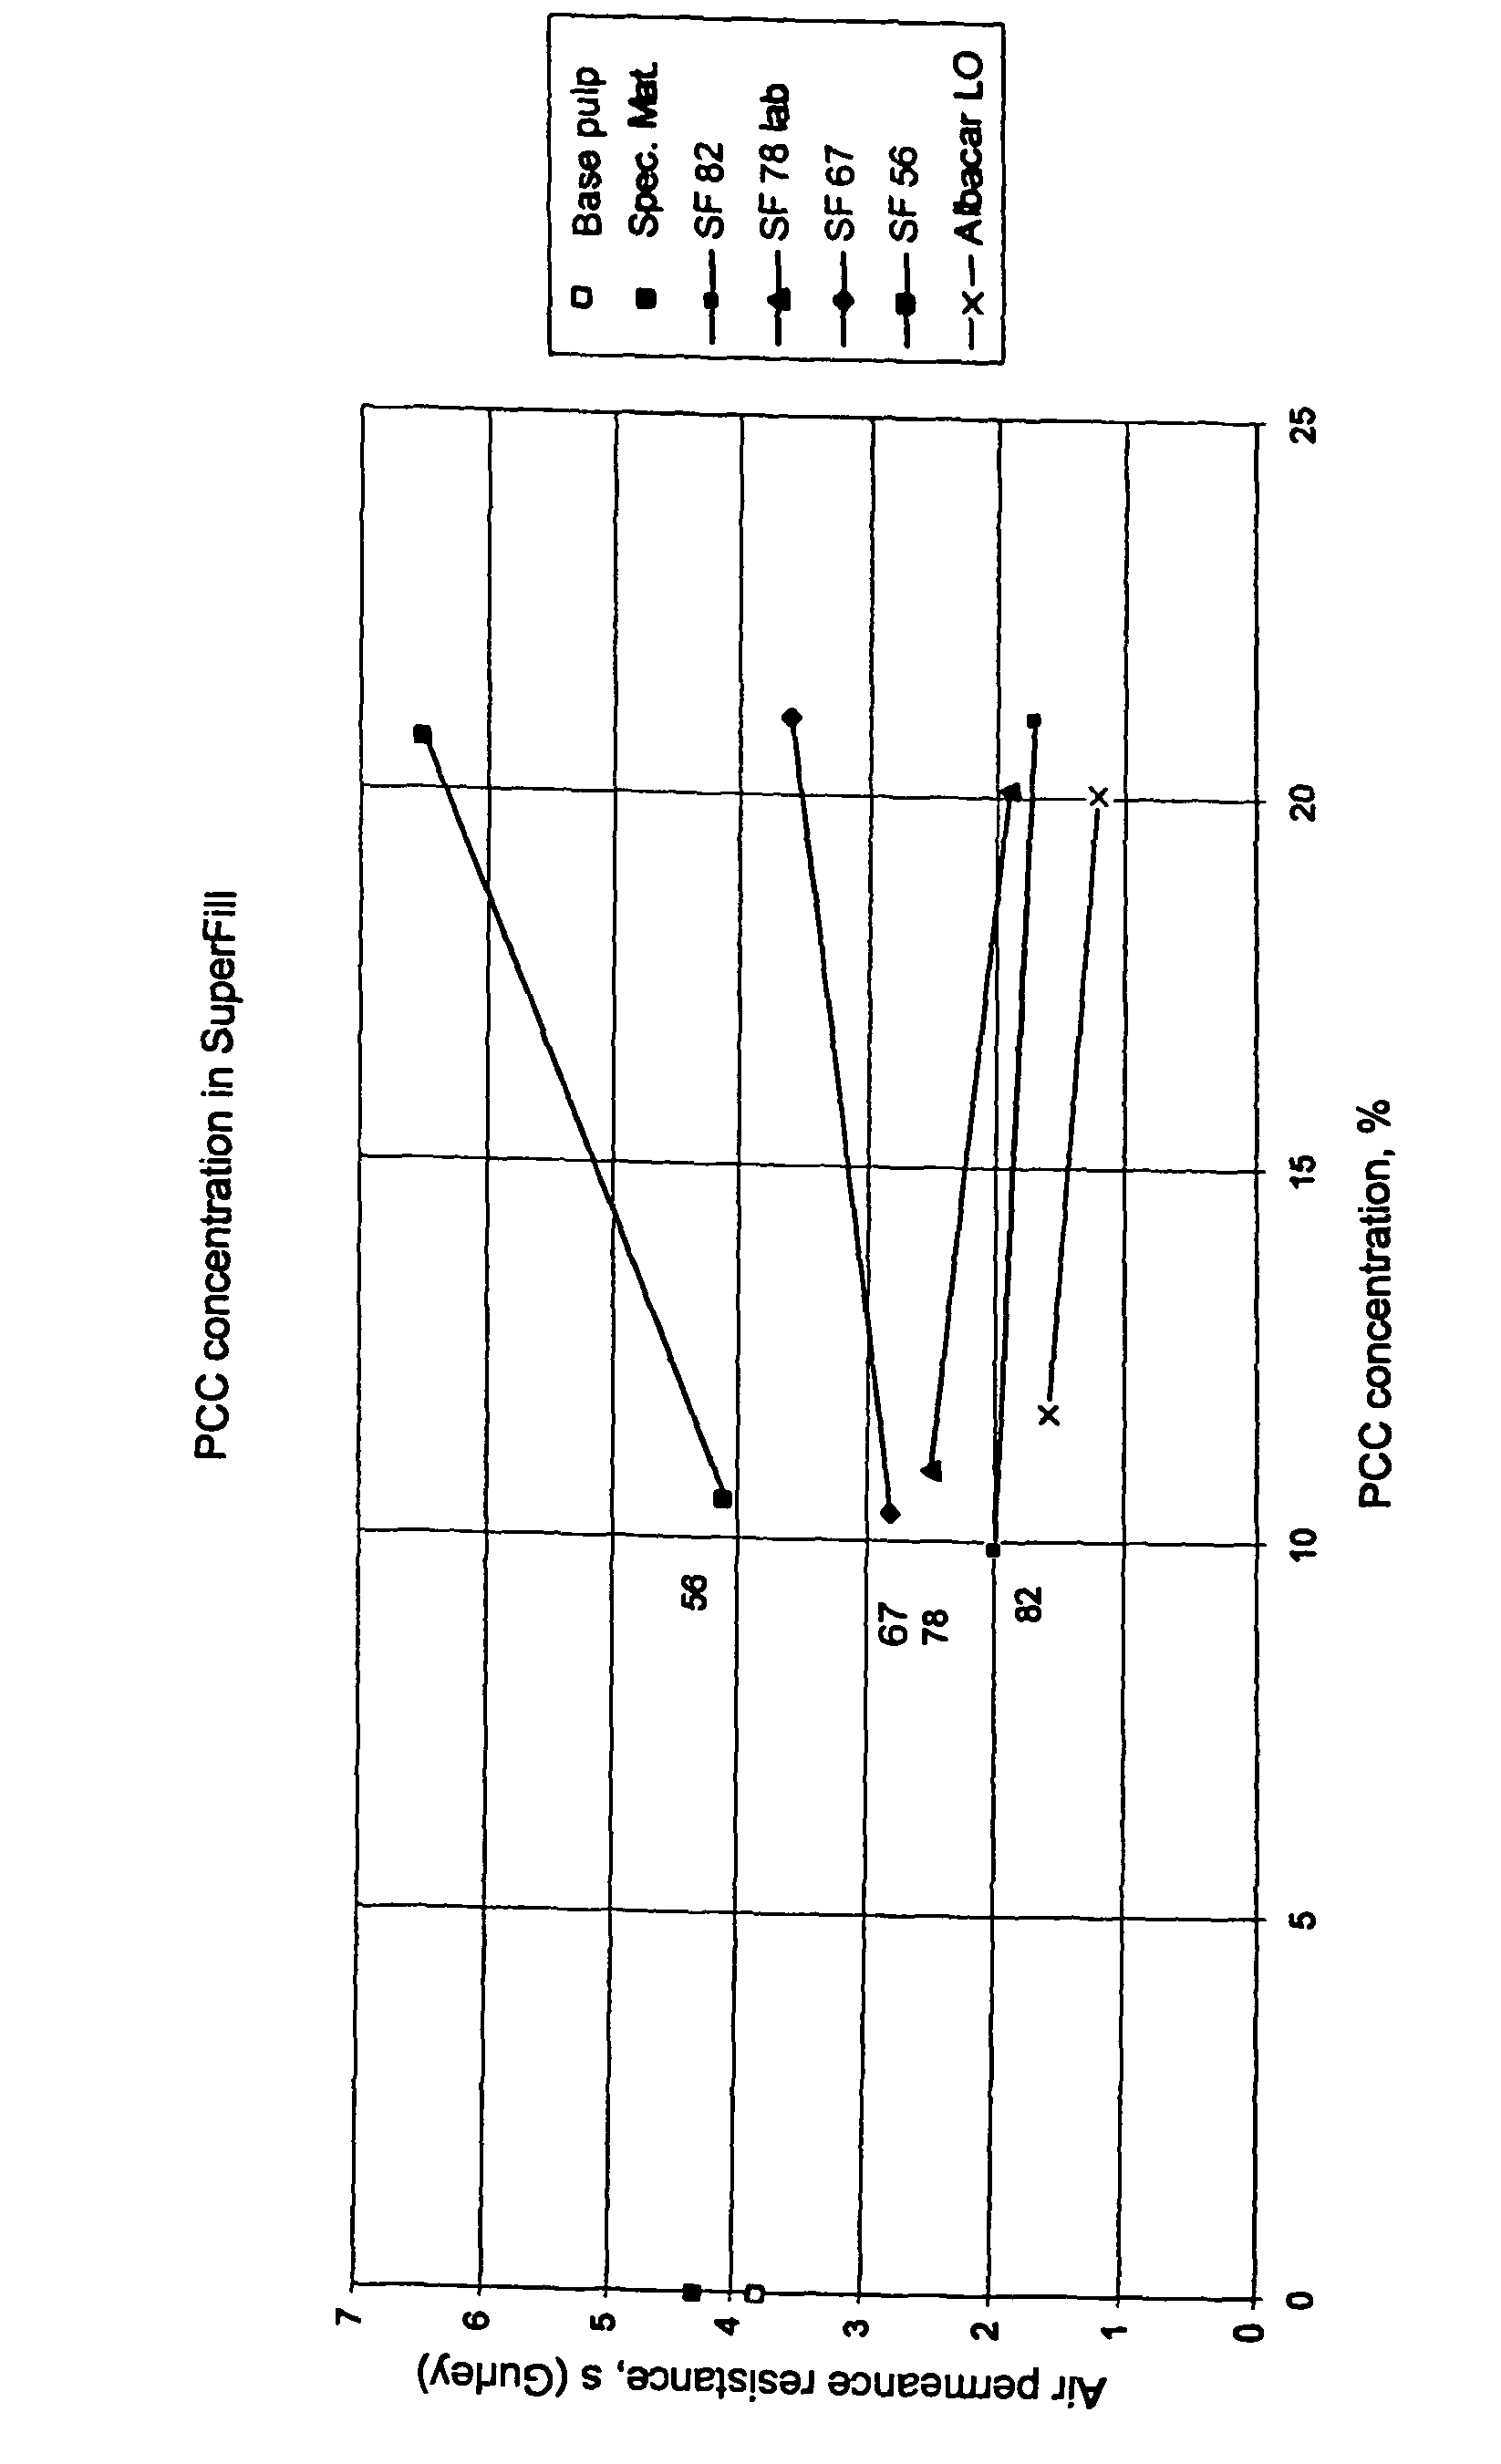 Method for manufacturing paper and board